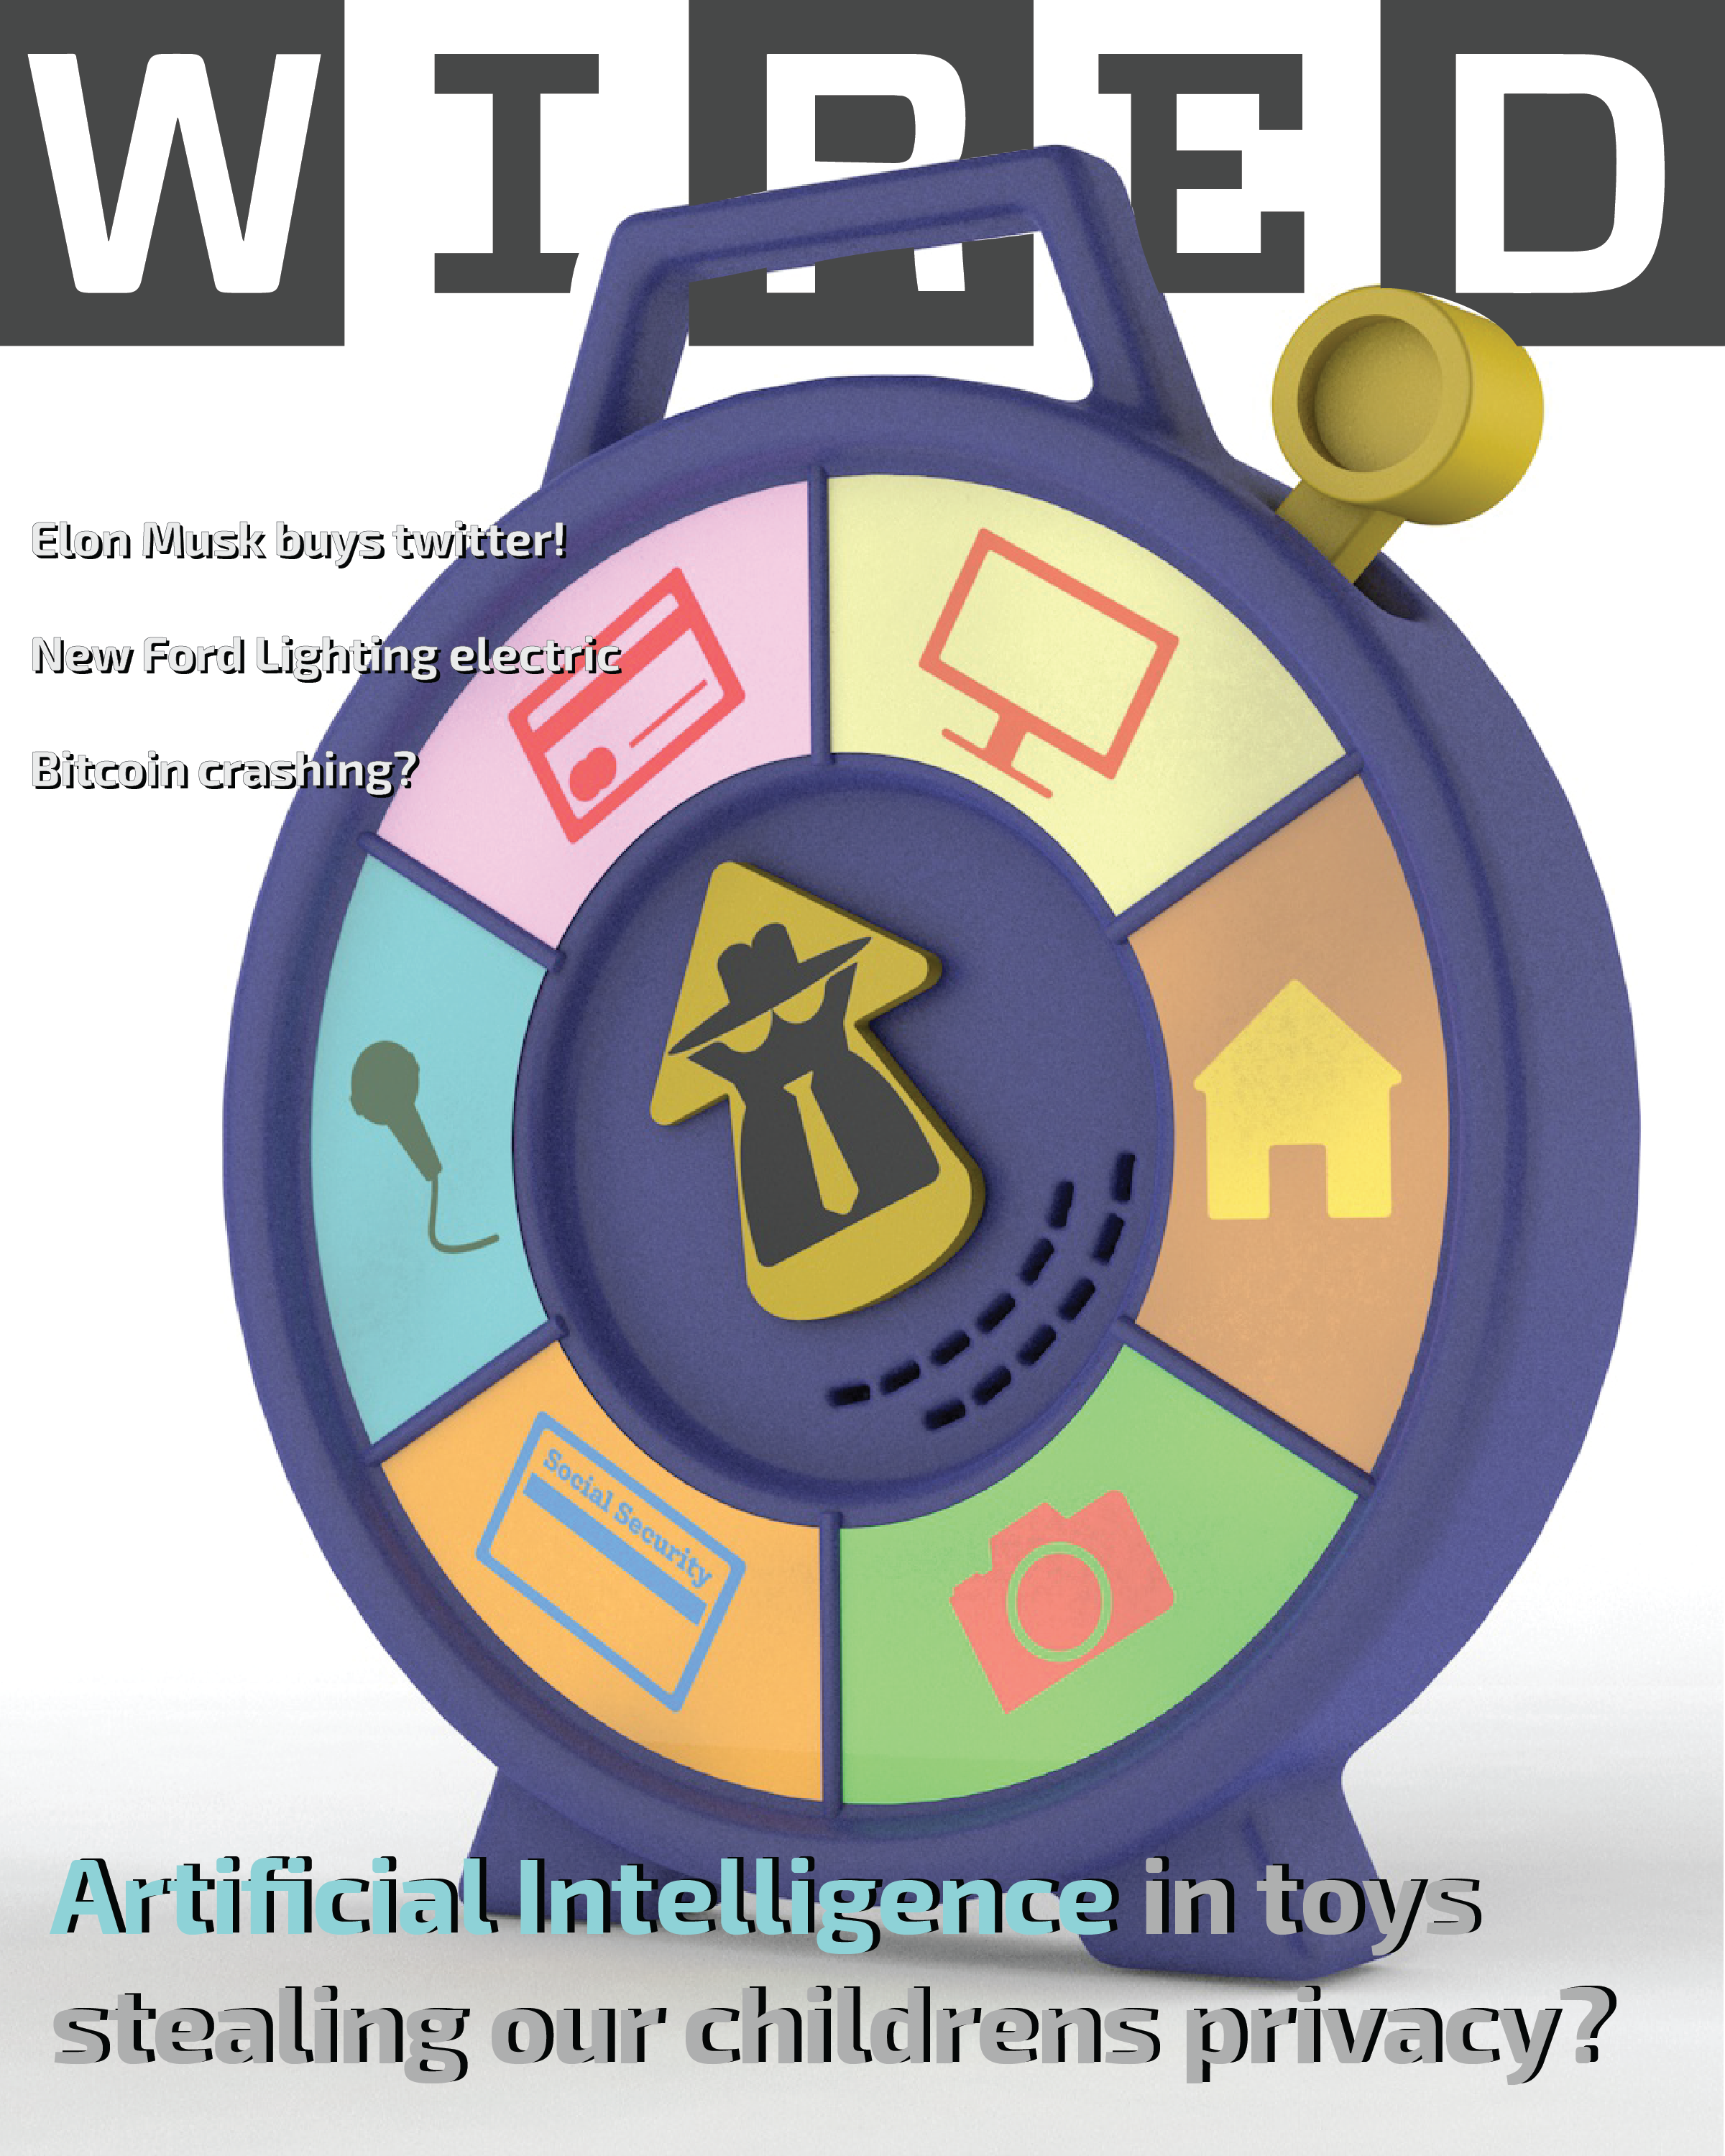 Wired Magazine Cover study